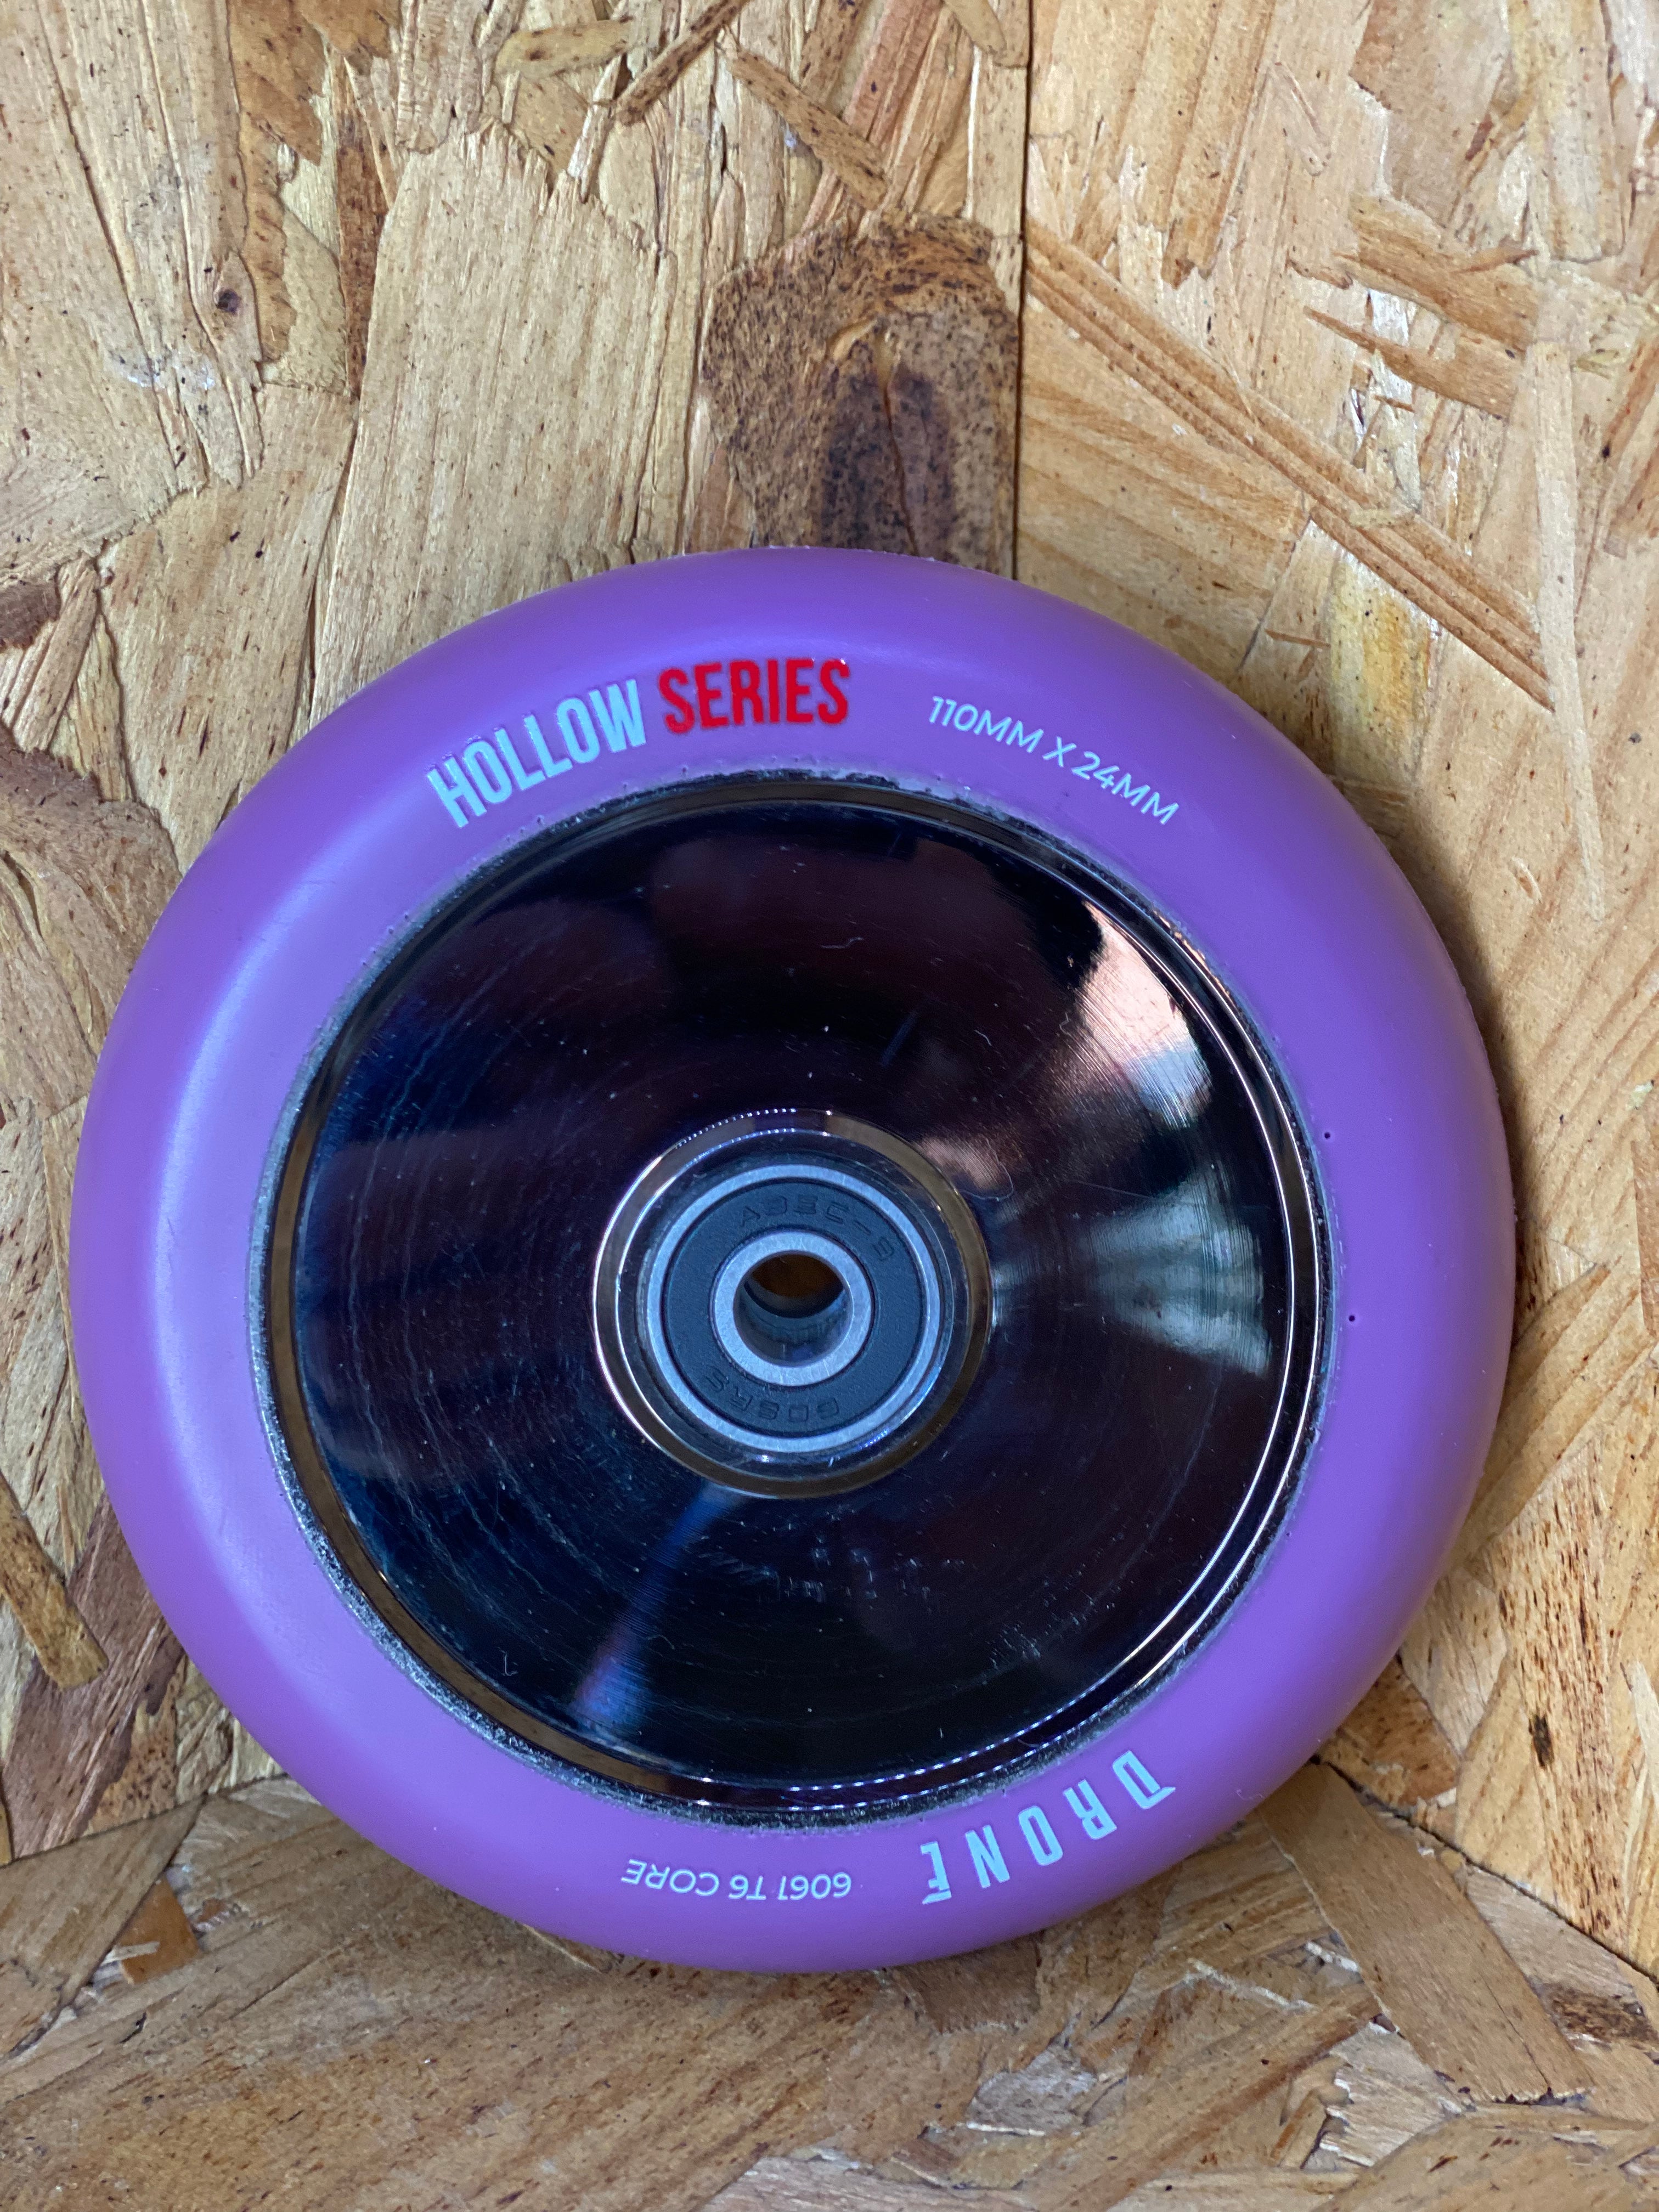 Drone Hollow Core 110mm Scooter Wheel